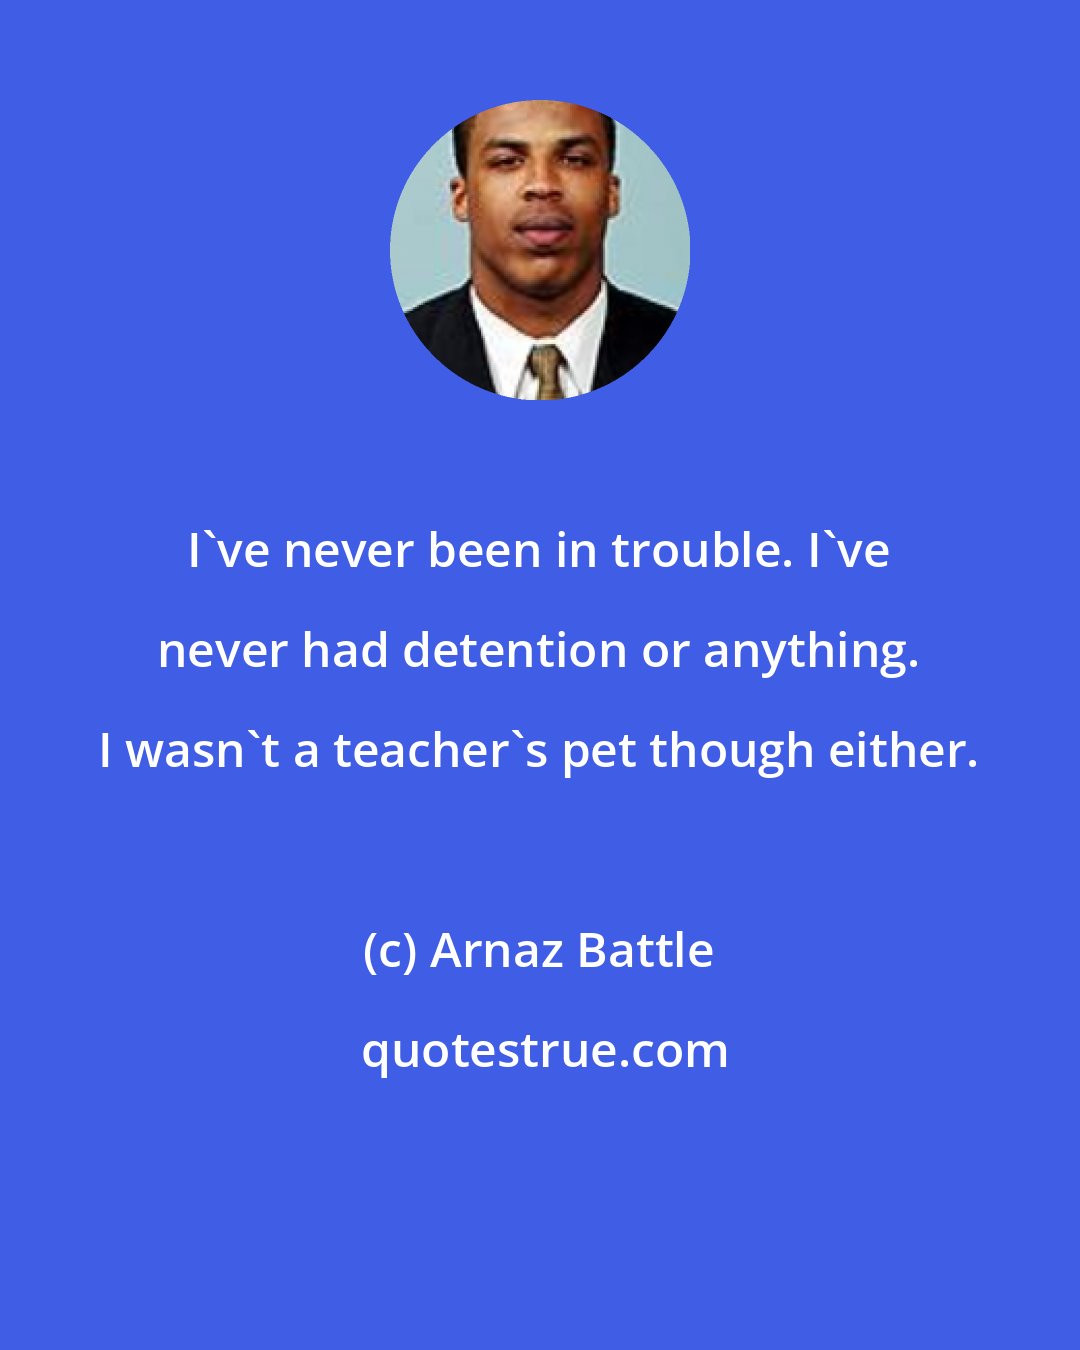 Arnaz Battle: I've never been in trouble. I've never had detention or anything. I wasn't a teacher's pet though either.